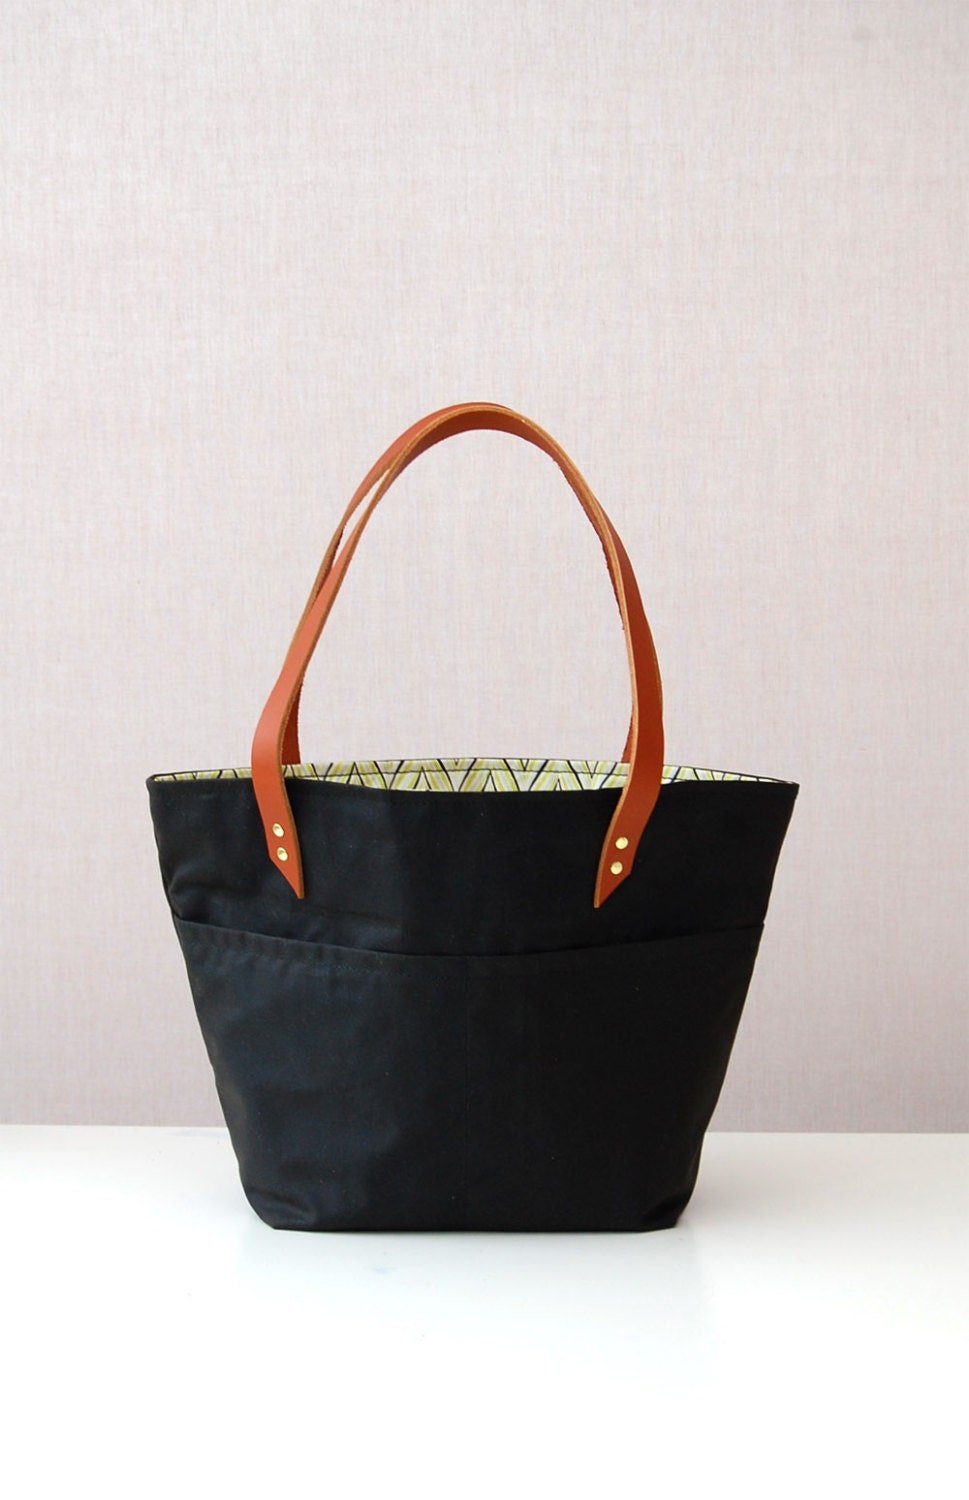 Waxed cotton canvas tote bag with leather handles by ForestBags